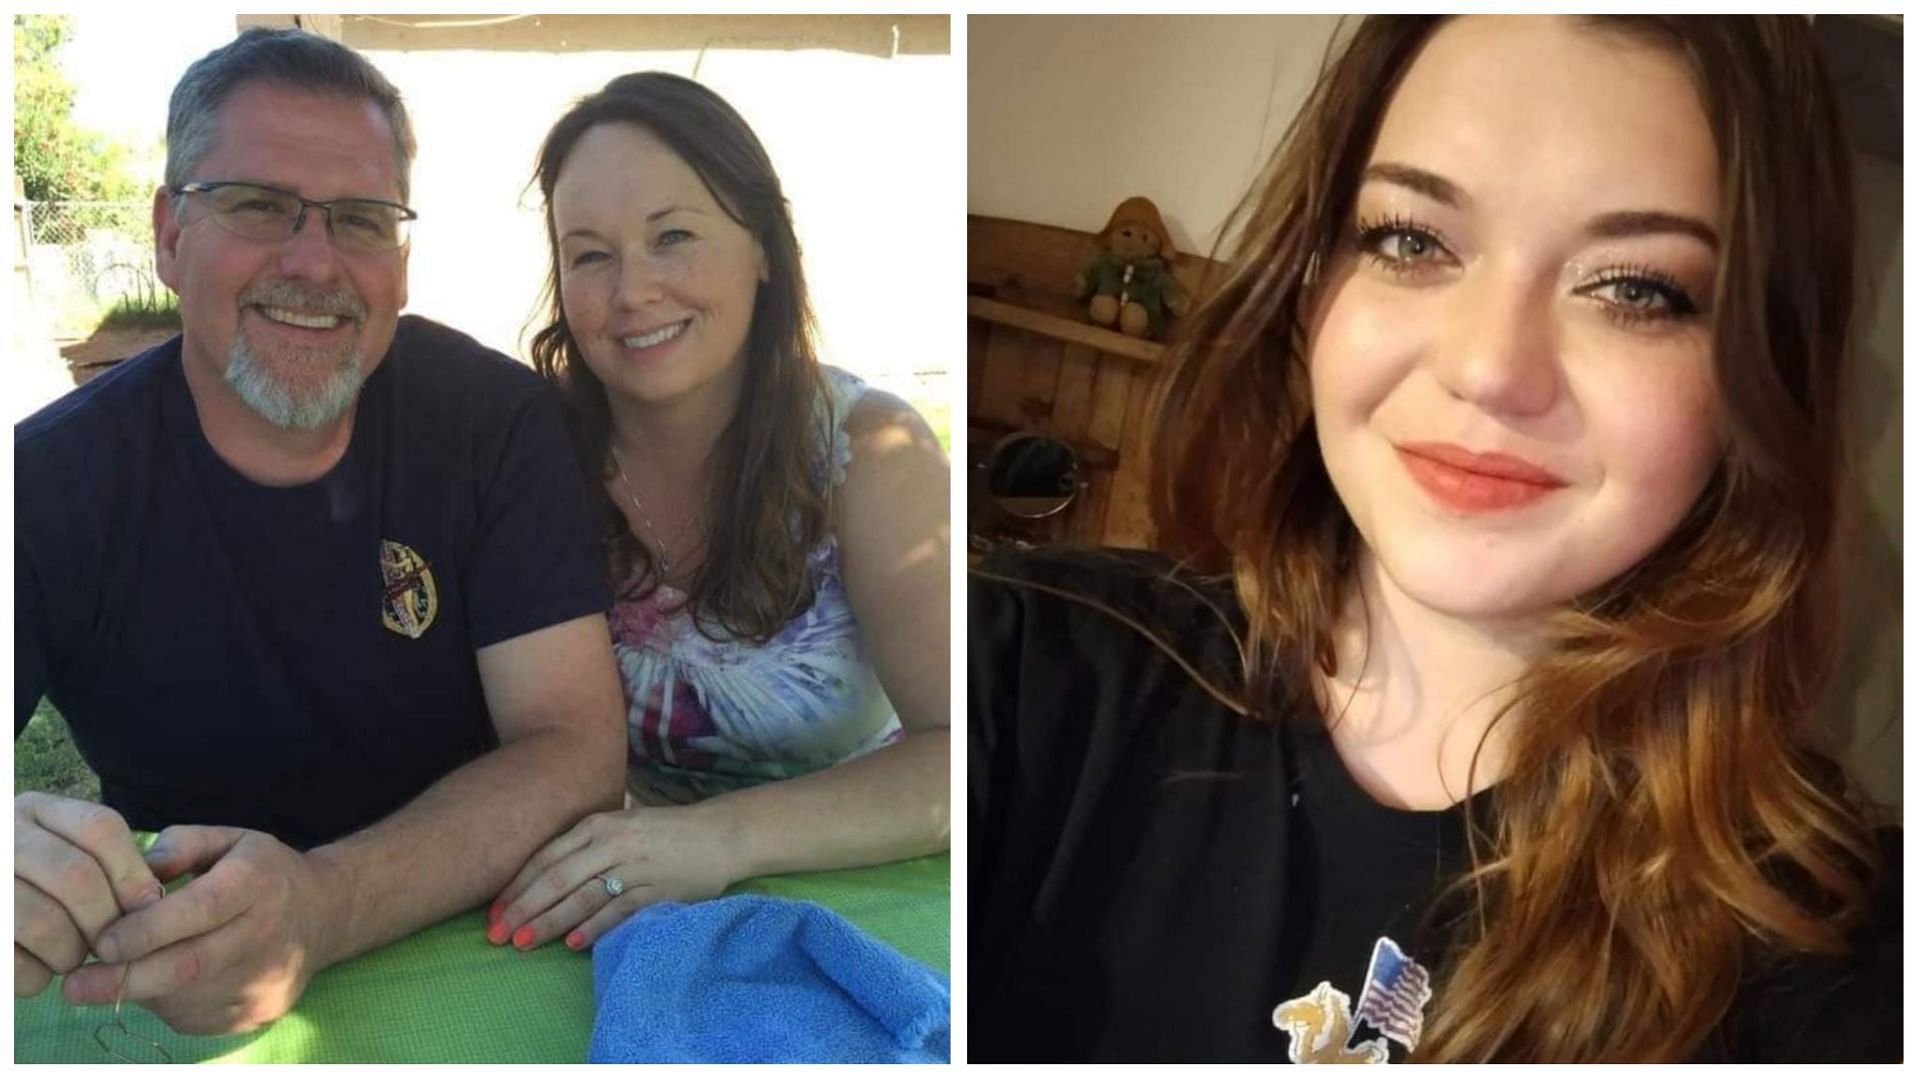 William Busick (left) killed his wife Chastity (left) and stepdaughter Jasmine (right) and then fatally shot himself, (Images via Chastity Shirley Busick and Jasmine Bailey/Facebook)